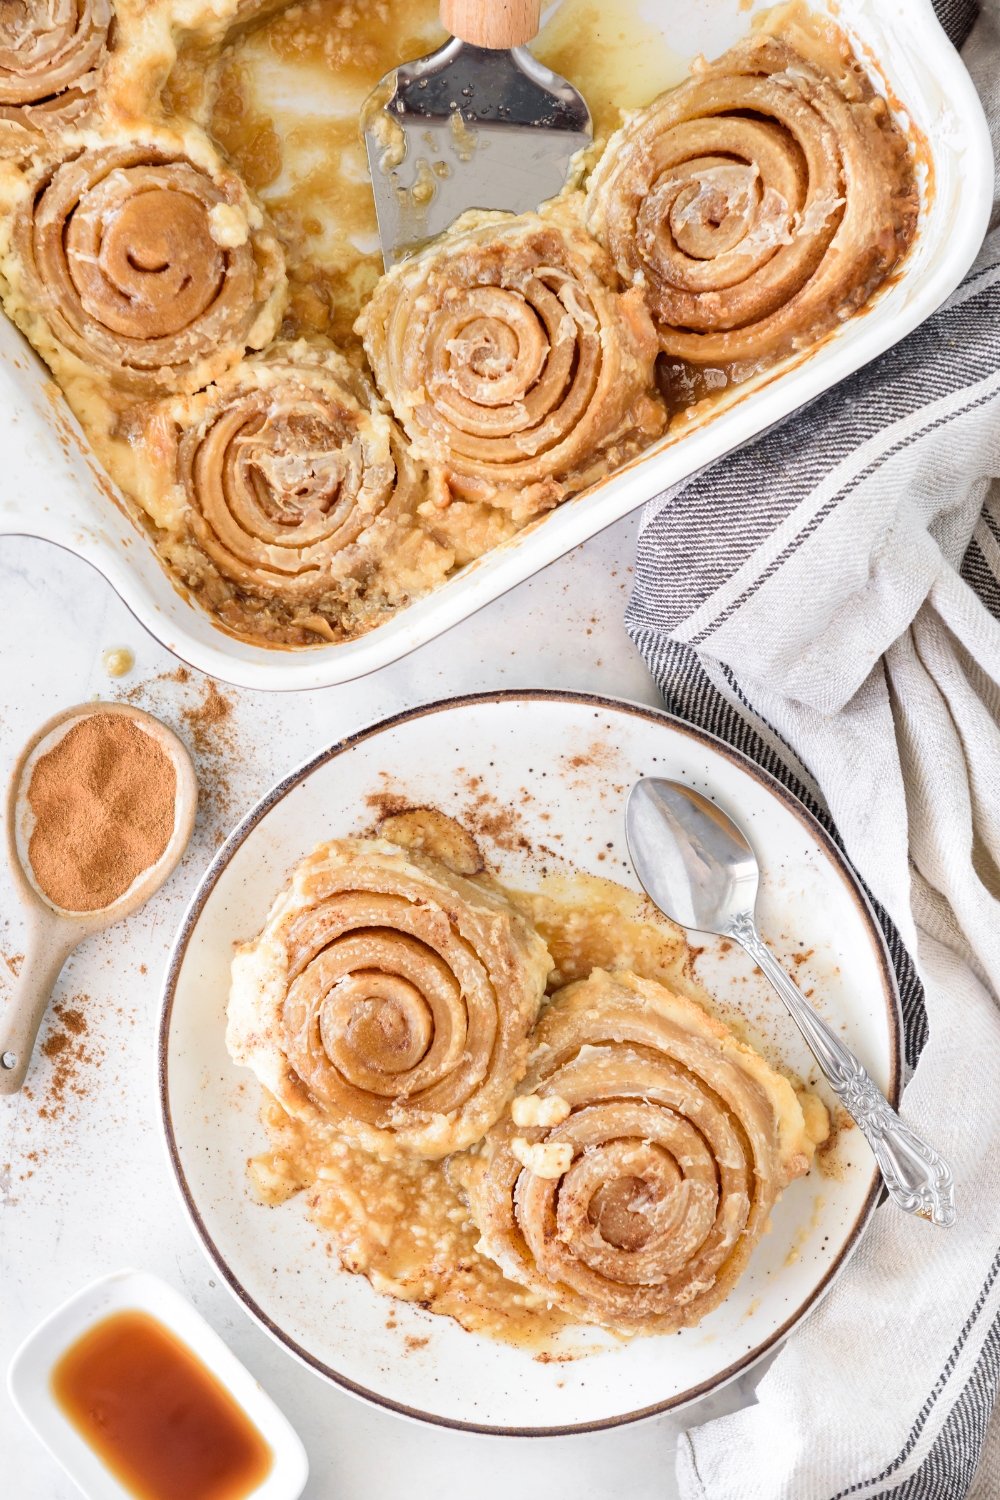 Two cinnamon rolls on a plate dusted with cinnamon. The rest of the cinnamon rolls are in a baking dish next to the plate and a third cinnamon roll is being scooped out of the baking dish.